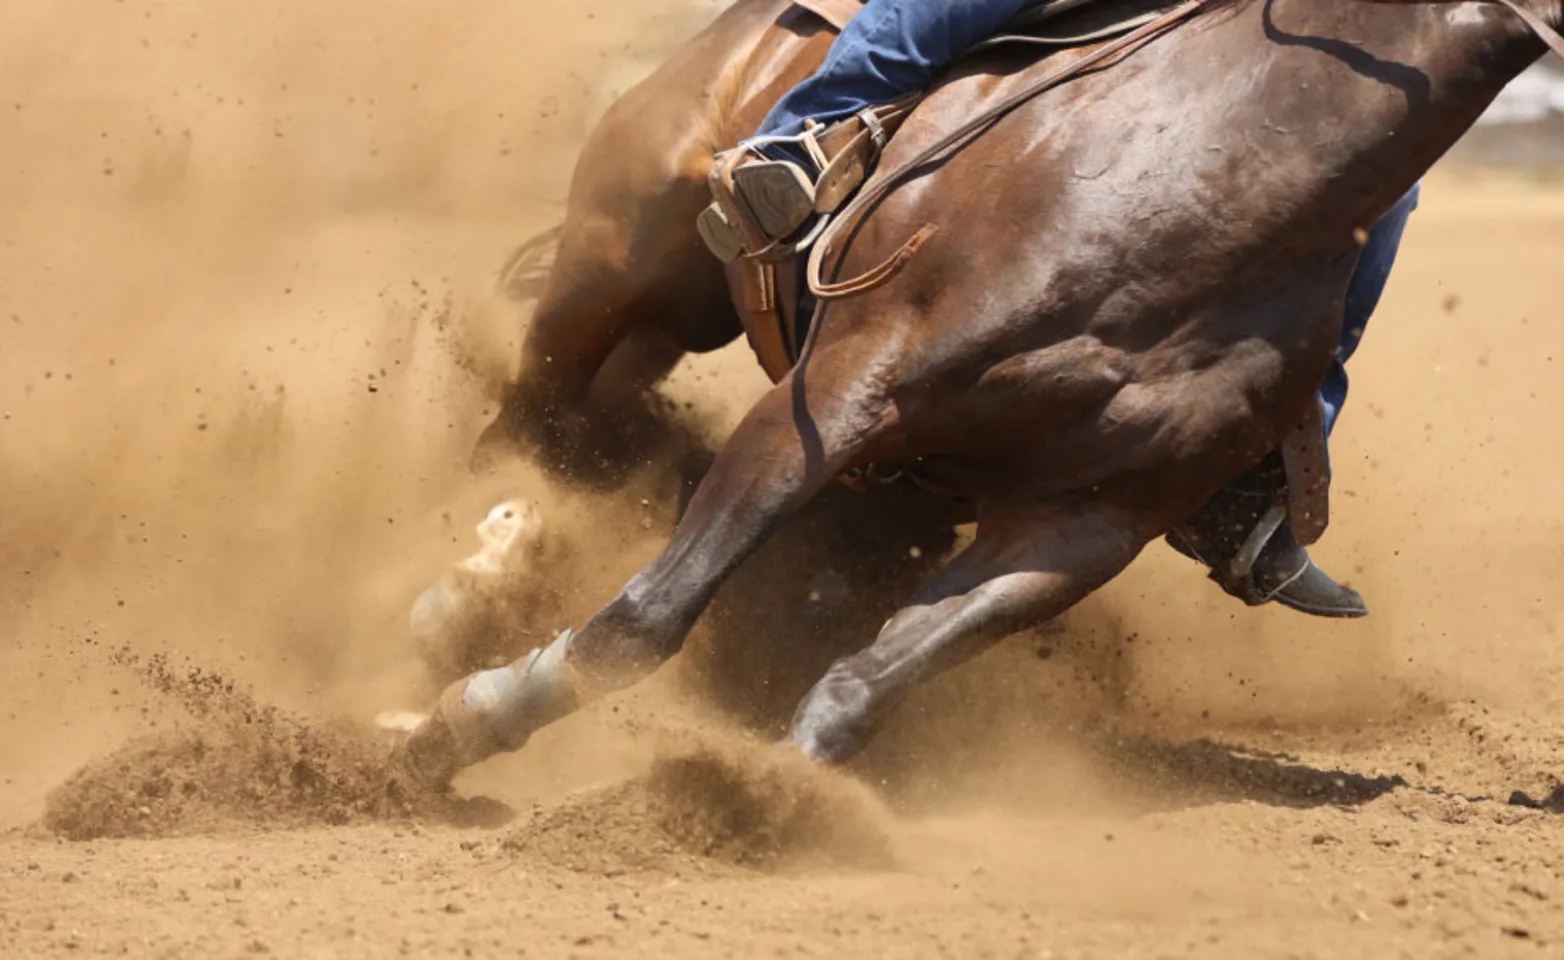 Horse running at an angle through soft dirt of arena